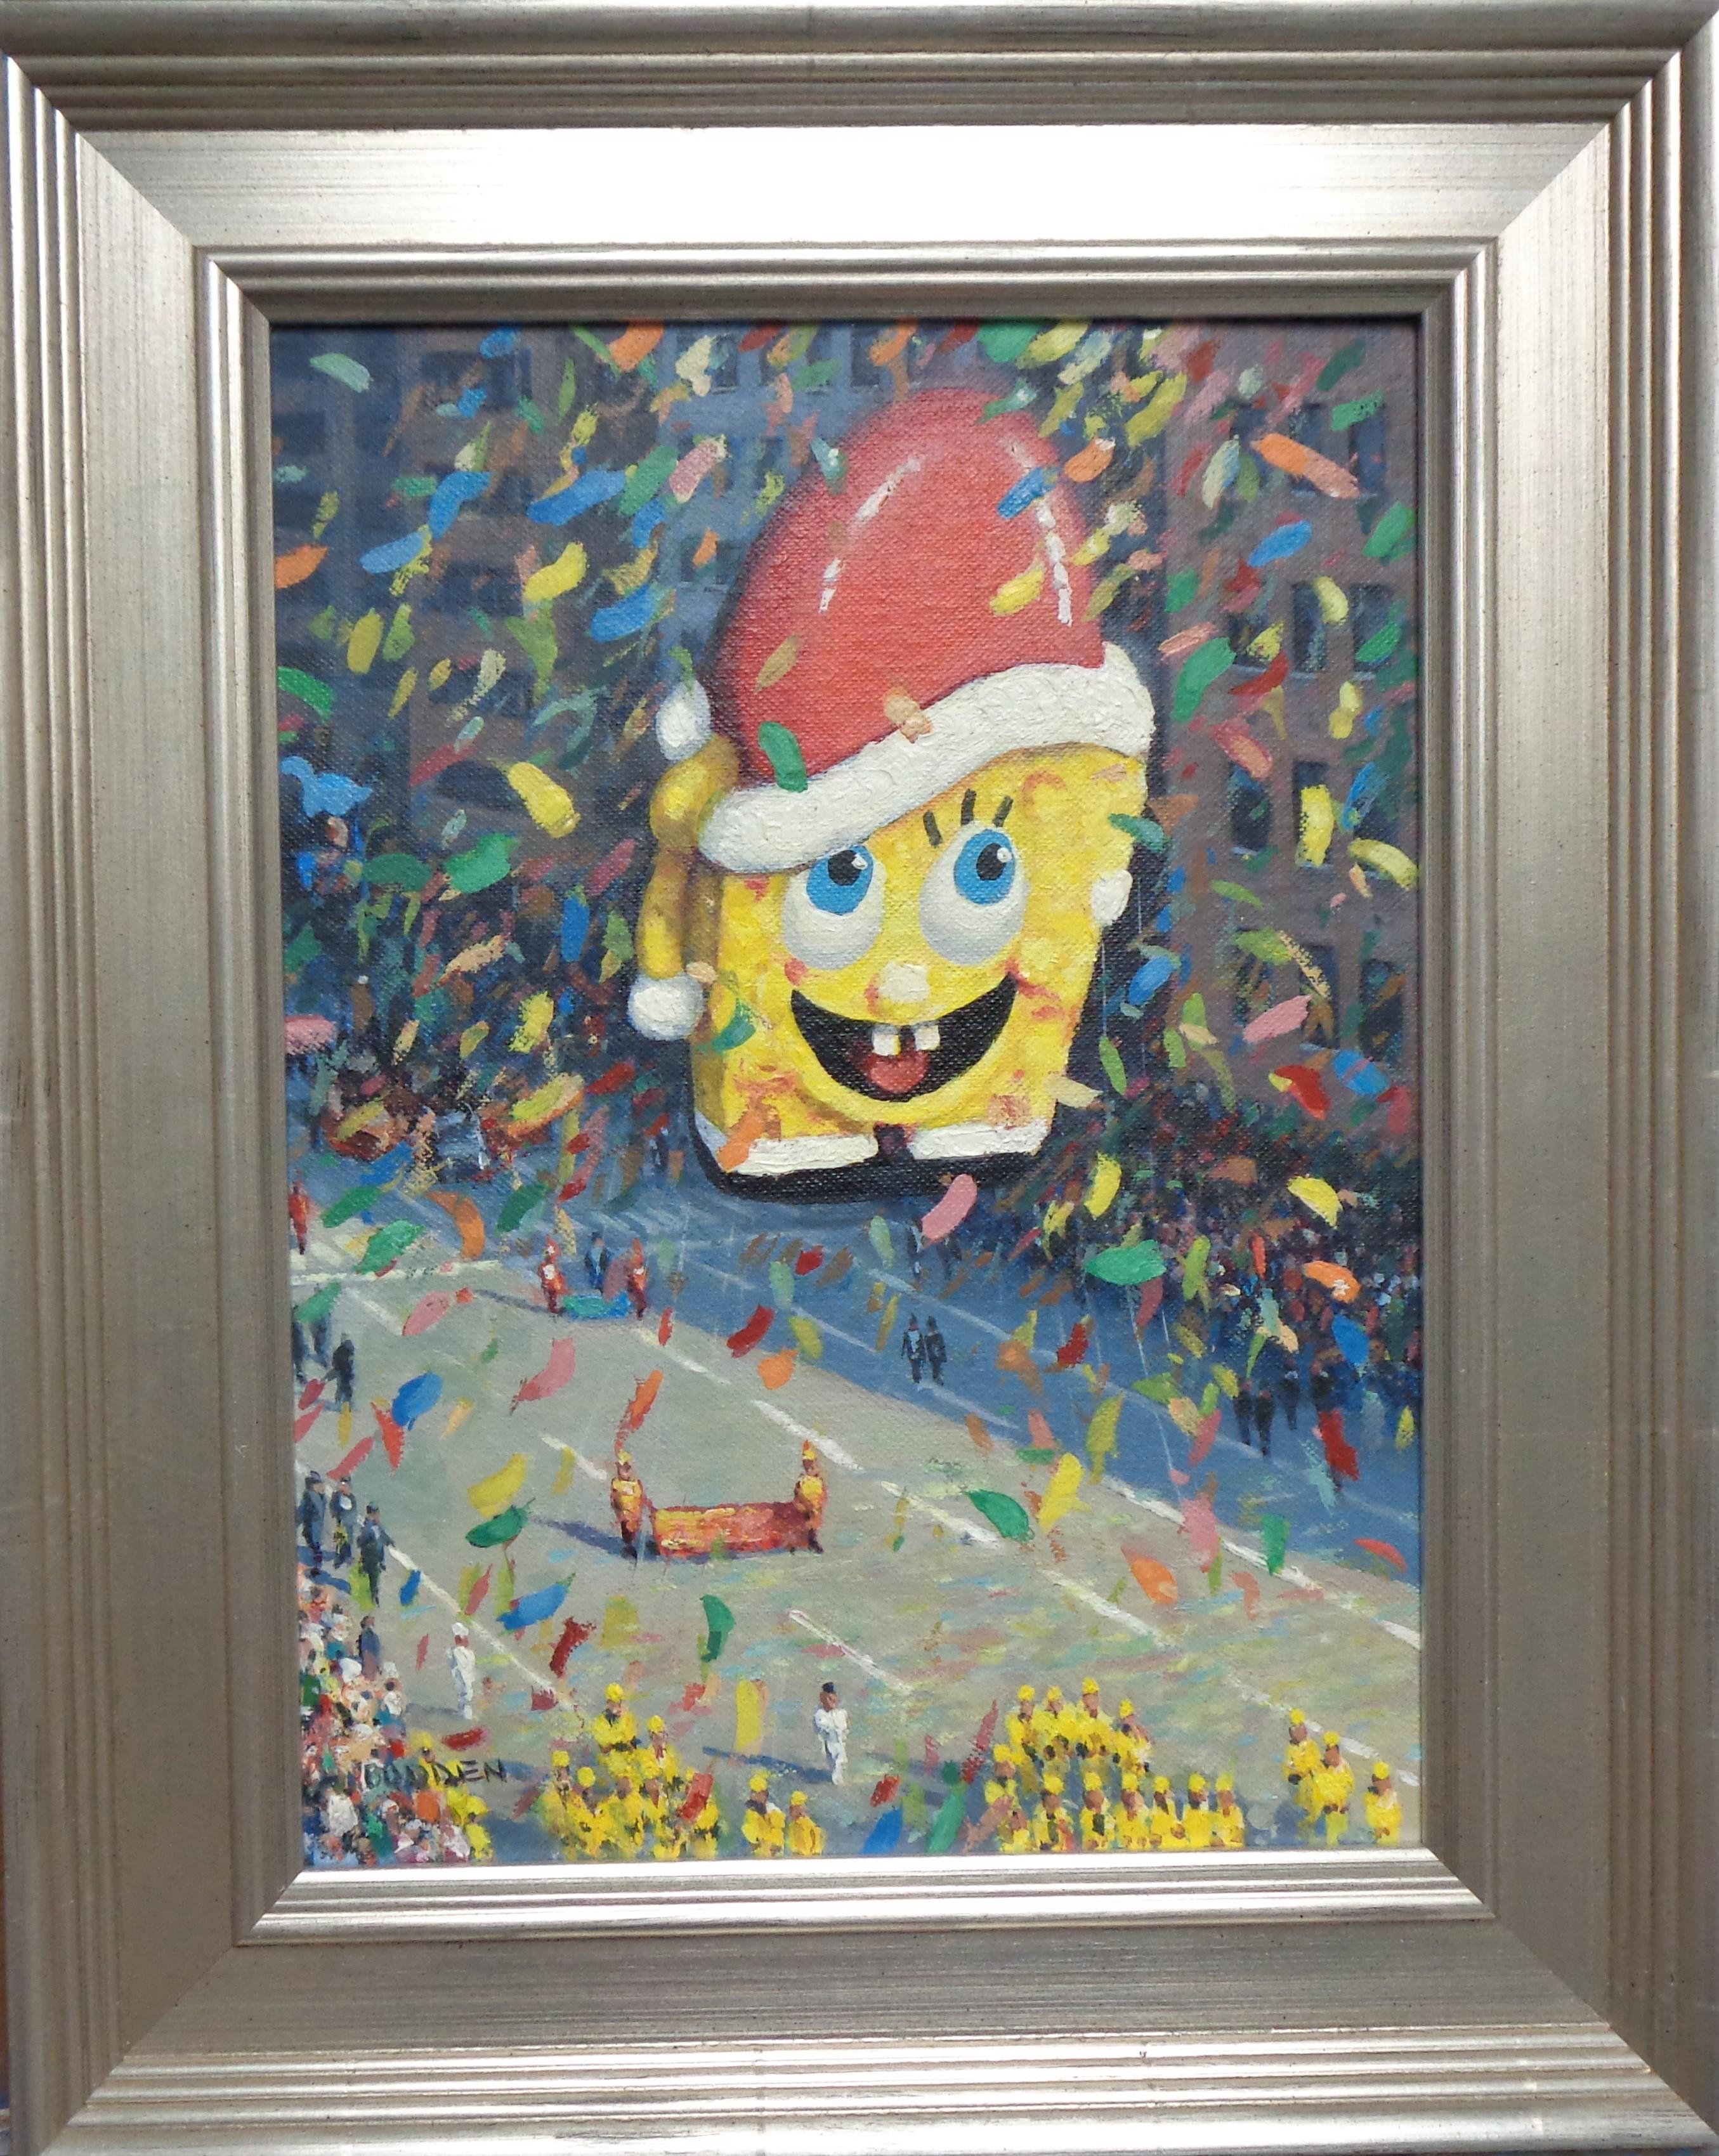 Macy's Sponge Bob
Part of a series of 11 paintings.
An oil painting on canvas panel by award winning contemporary artist Michael Budden that showcases images from the Macy's Thanksgiving Parade, NYC. The image measures 12 x 9 unframed and 15.75 x